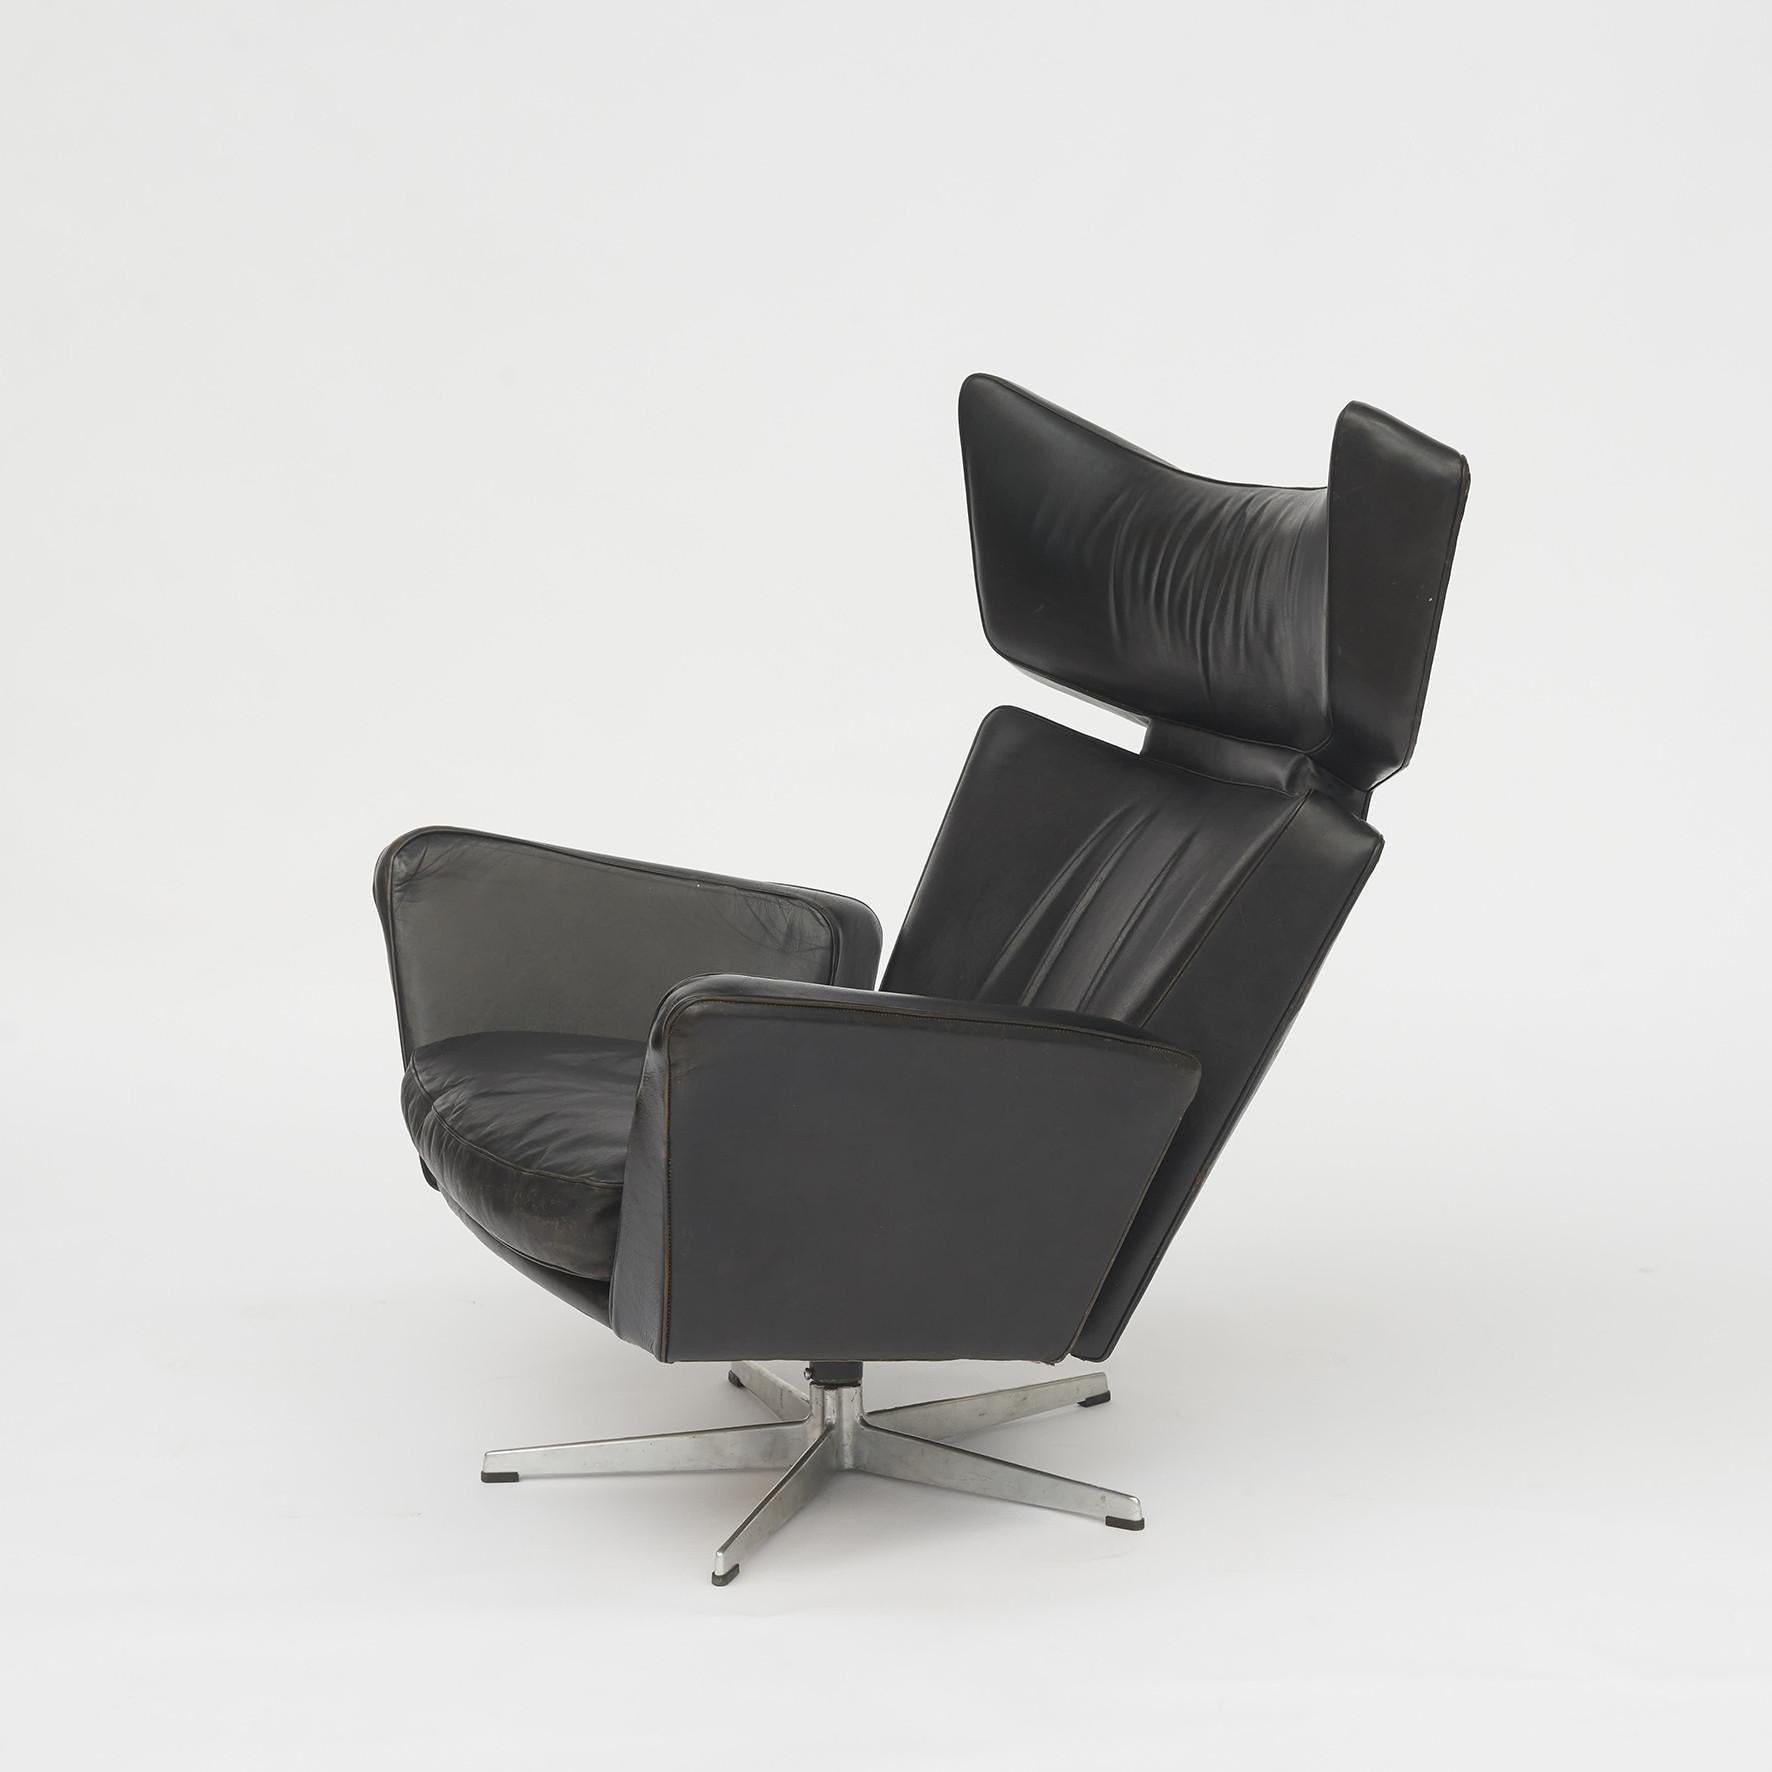 Arne Jacobsen, Denmark, 1902-1971.
Ox chair in original condition upholstered with black leather. One of the first dating back to 1966. Manufactured by Fritz Hansen with corresponding label.
The chair has had one owner from 1966 until today.